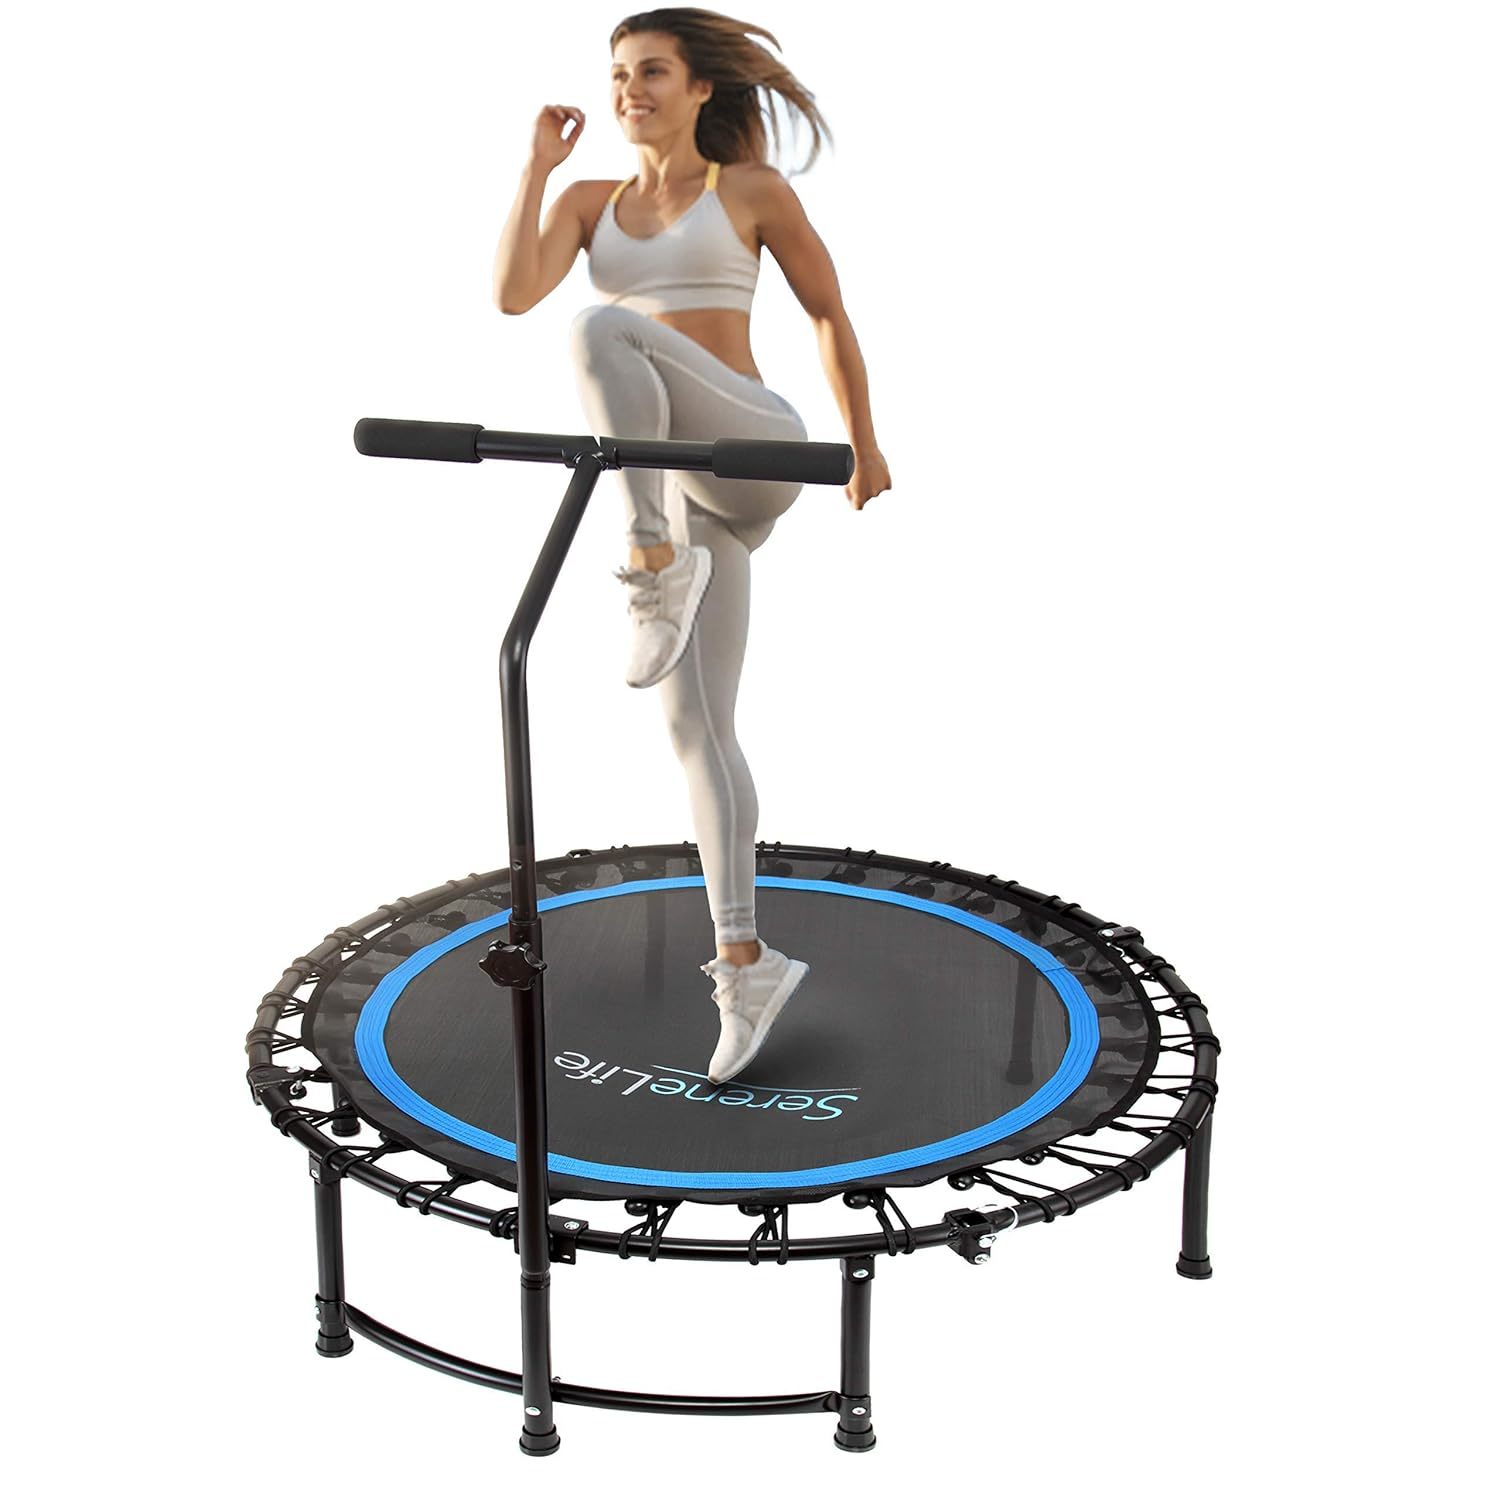 Indoor Rebounder Fitness Trampoline for Adults with Carry Bag(48